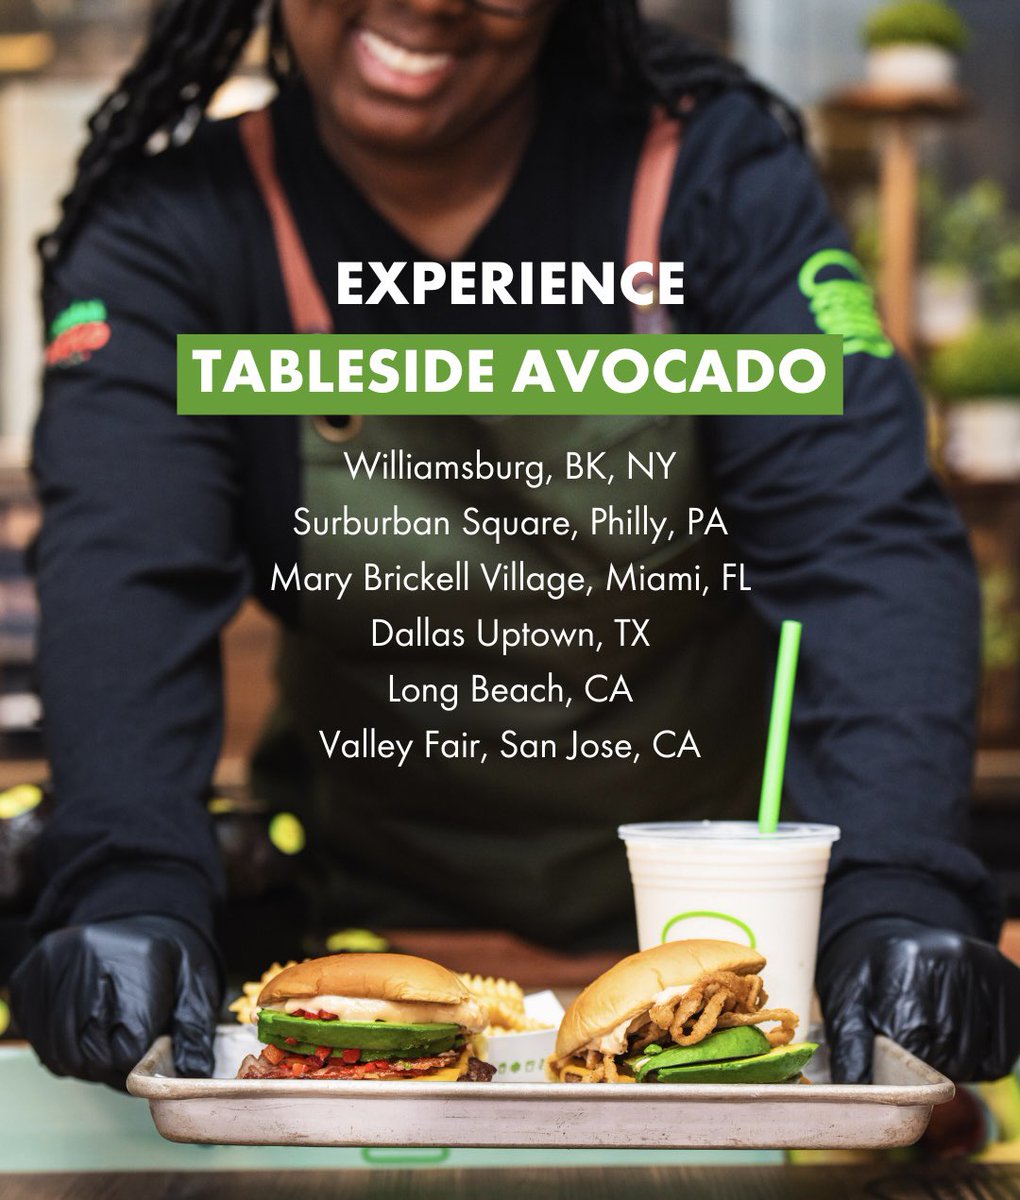 Calling all avocado lovers 🥑💚   Add avocado to a burger or sandwich in-Shack for a Tableside Avocado experience at select Shacks 4/25 and 4/26.   Chat with our Avocado Experts and select your own avocado to be sliced and served!